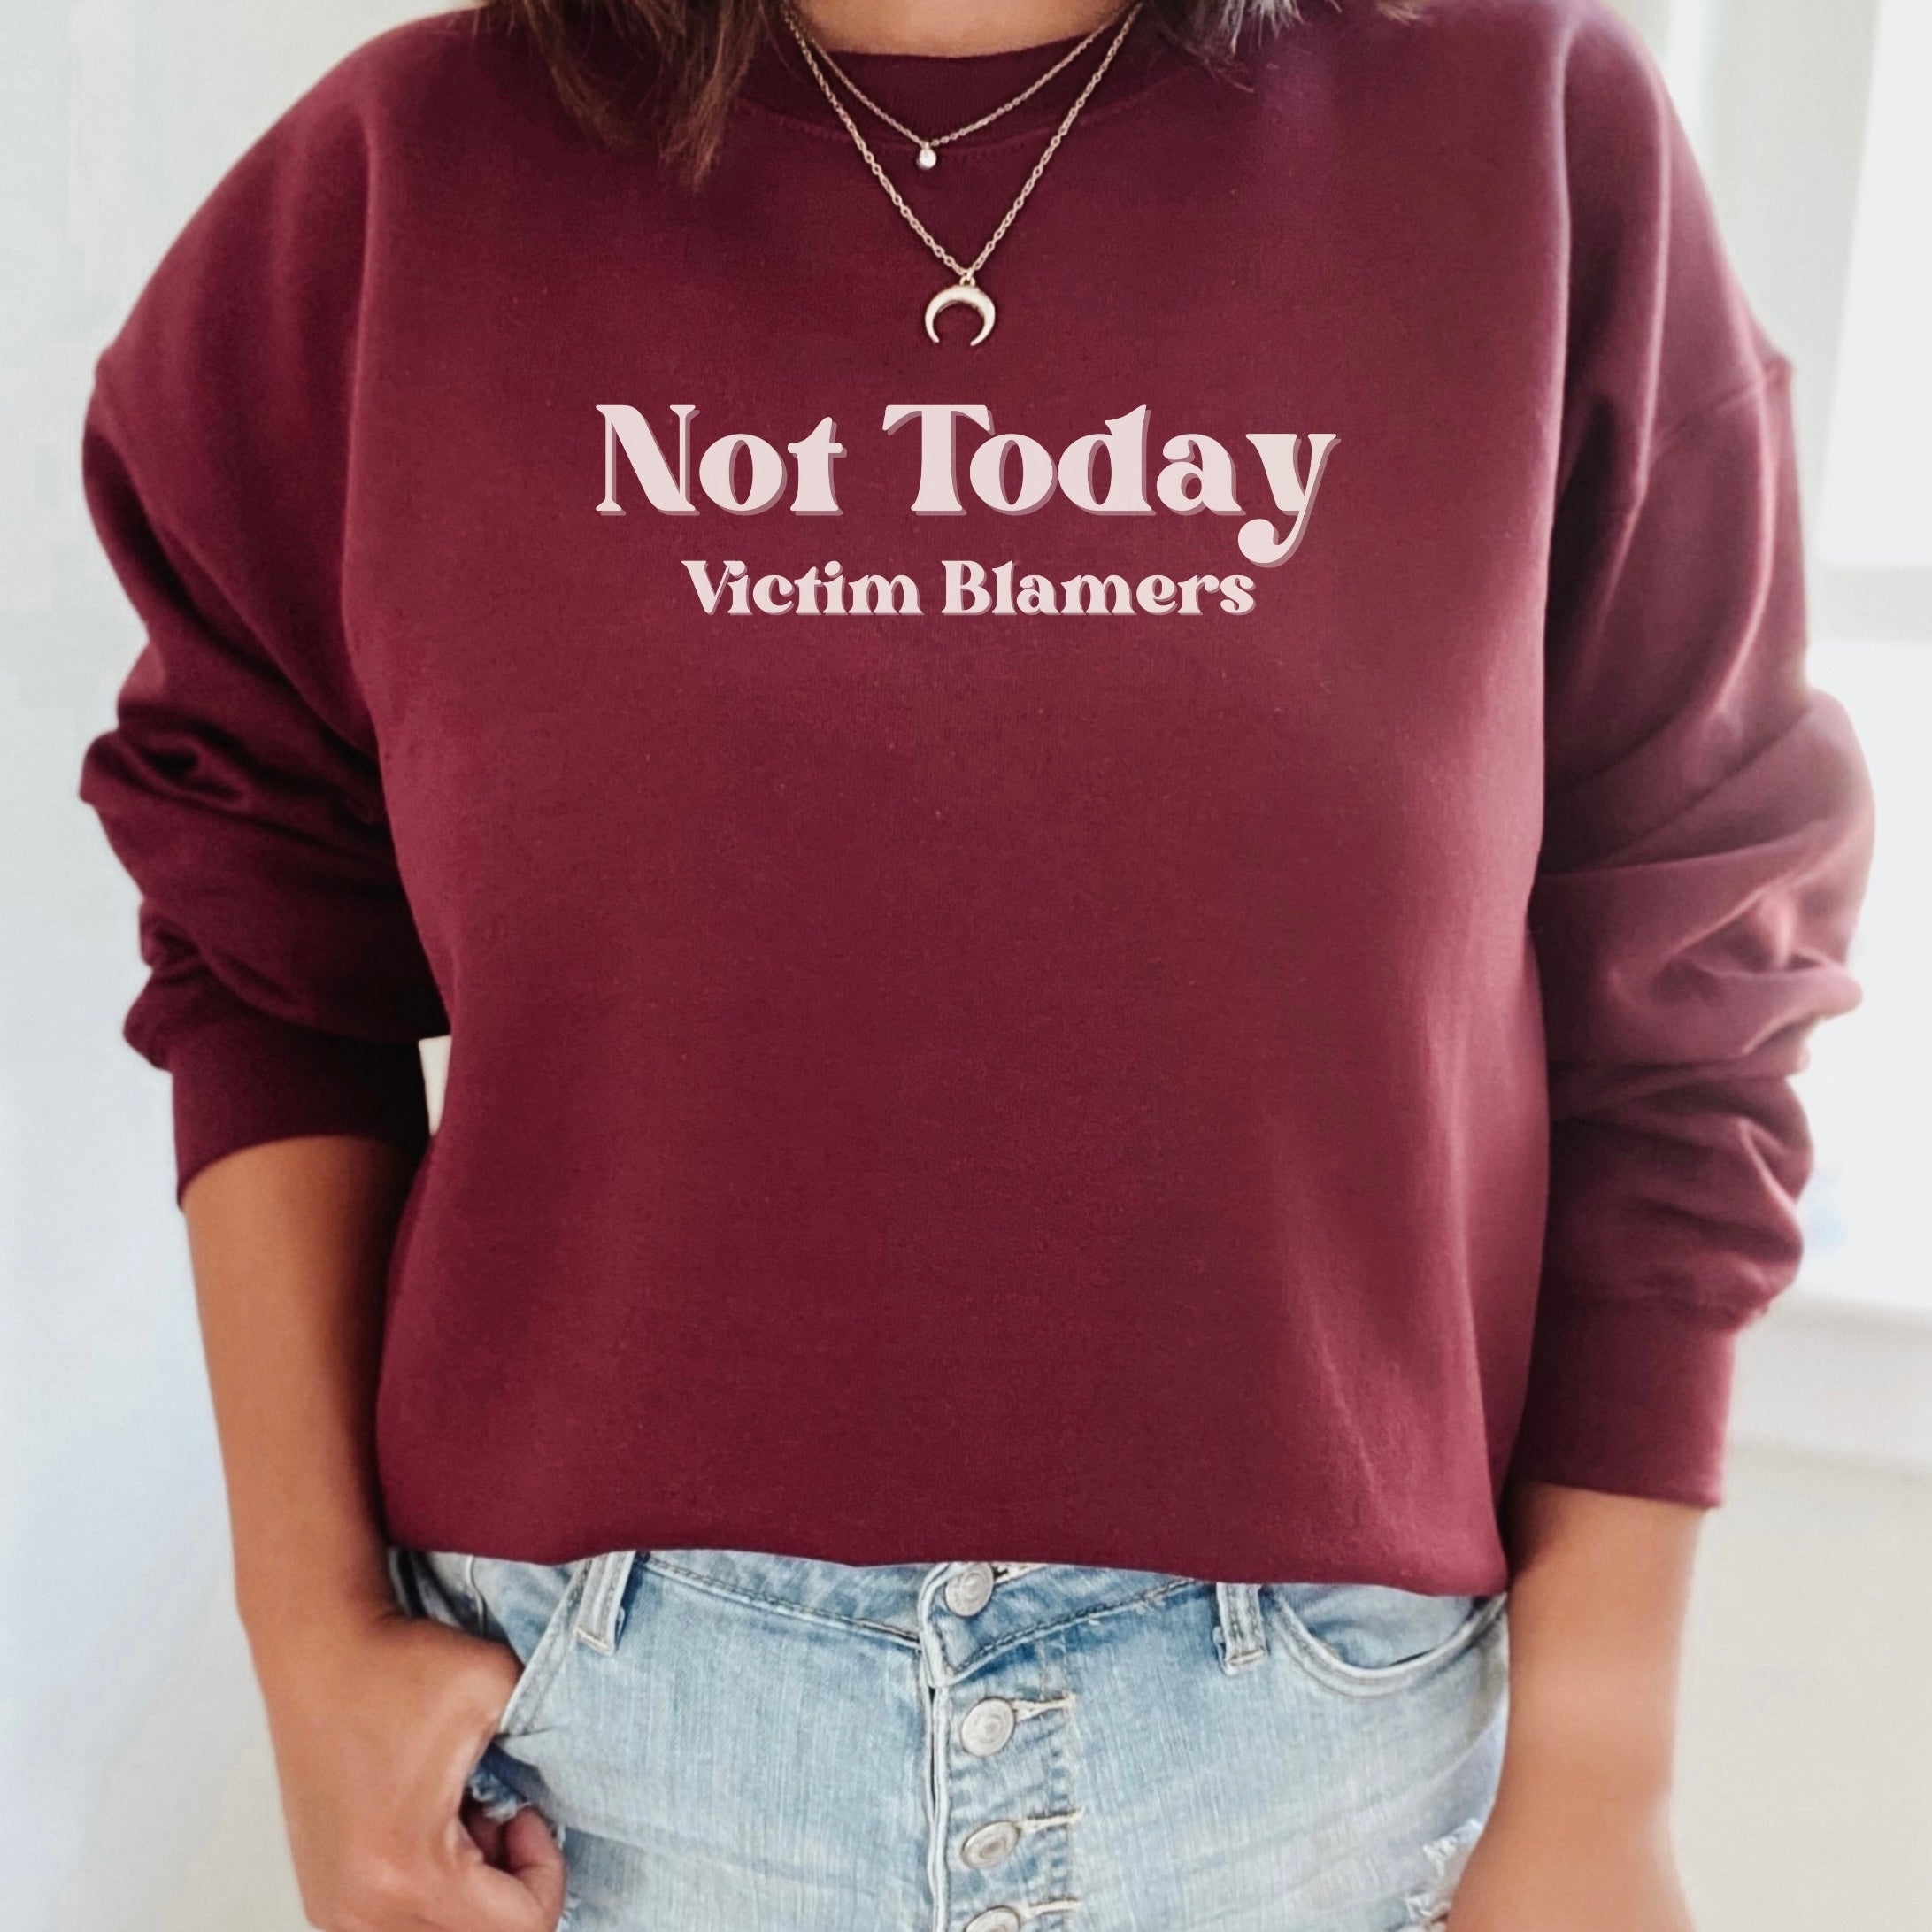 The front of the Maroon sweatshirt proudly displays the phrase "Not Today Victim Blamers" in a white bold and eye-catching font. This message serves as a reminder that we reject victim-blaming and support those who have faced injustice.